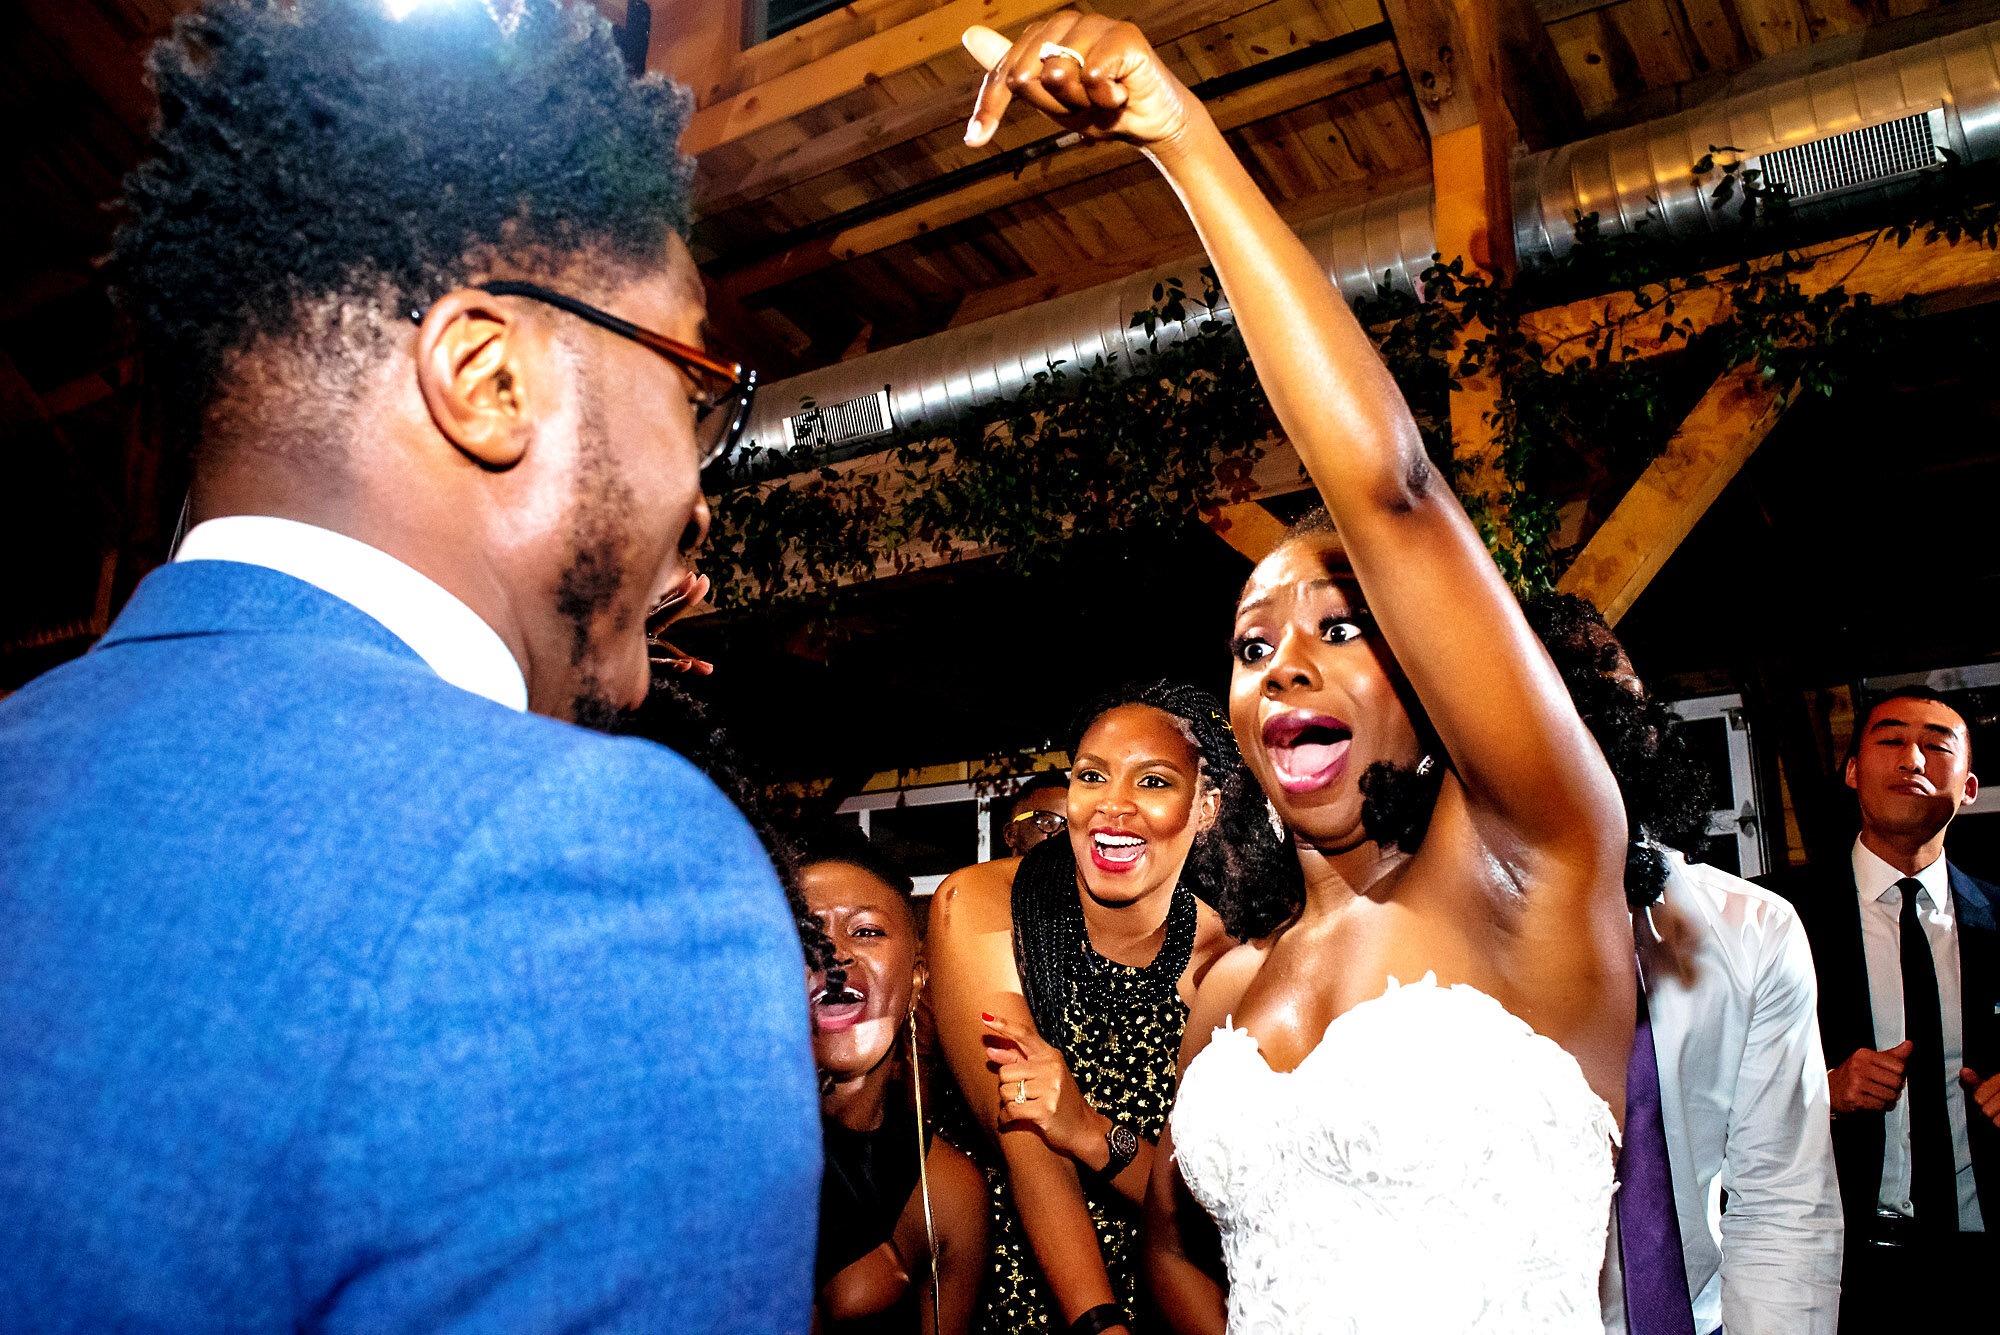 54-Austin-wedding-photographer-Jide-Alakija-bride jumping with hands pointed to guest.jpg.JPG